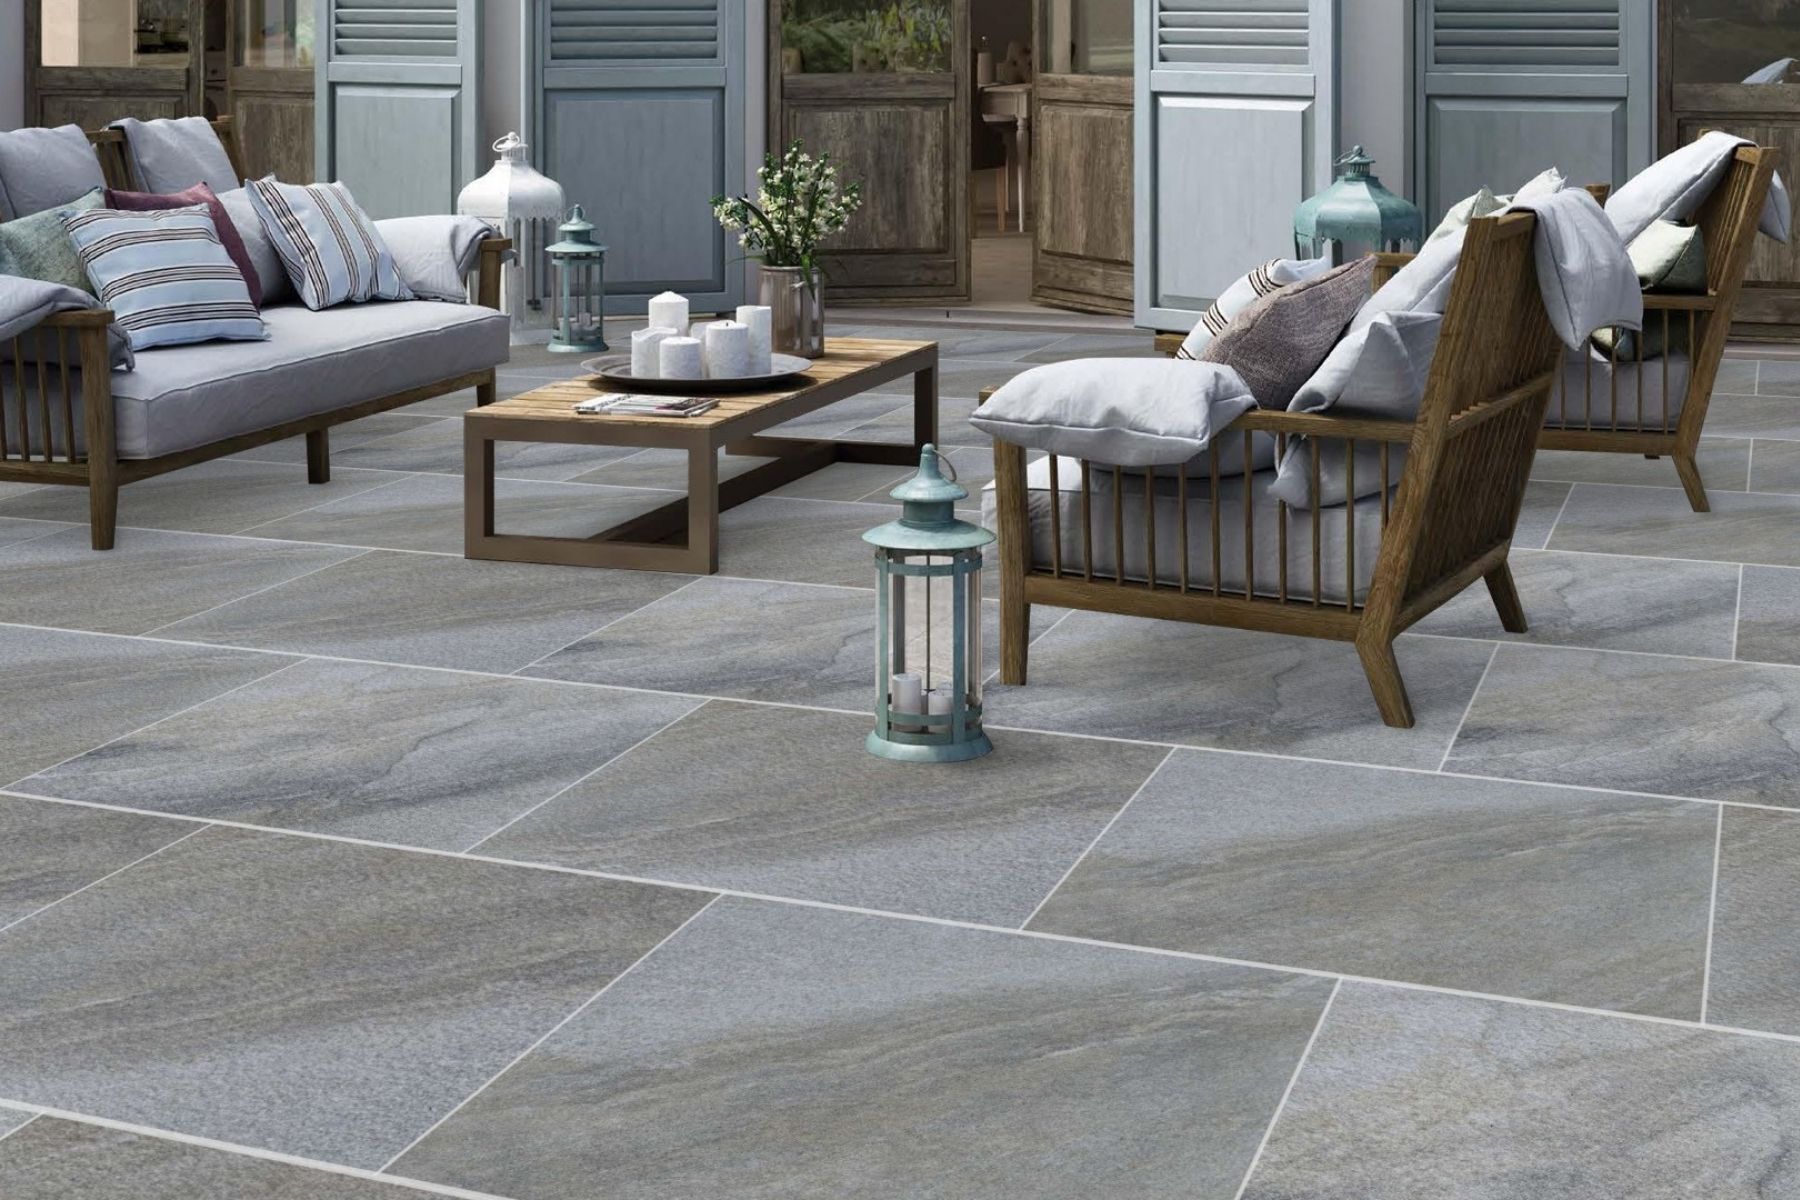 outdoor porcelain pavers in 20mm with a light grey wave look laid in brick pattern with grout on top is a wooden outdoor set